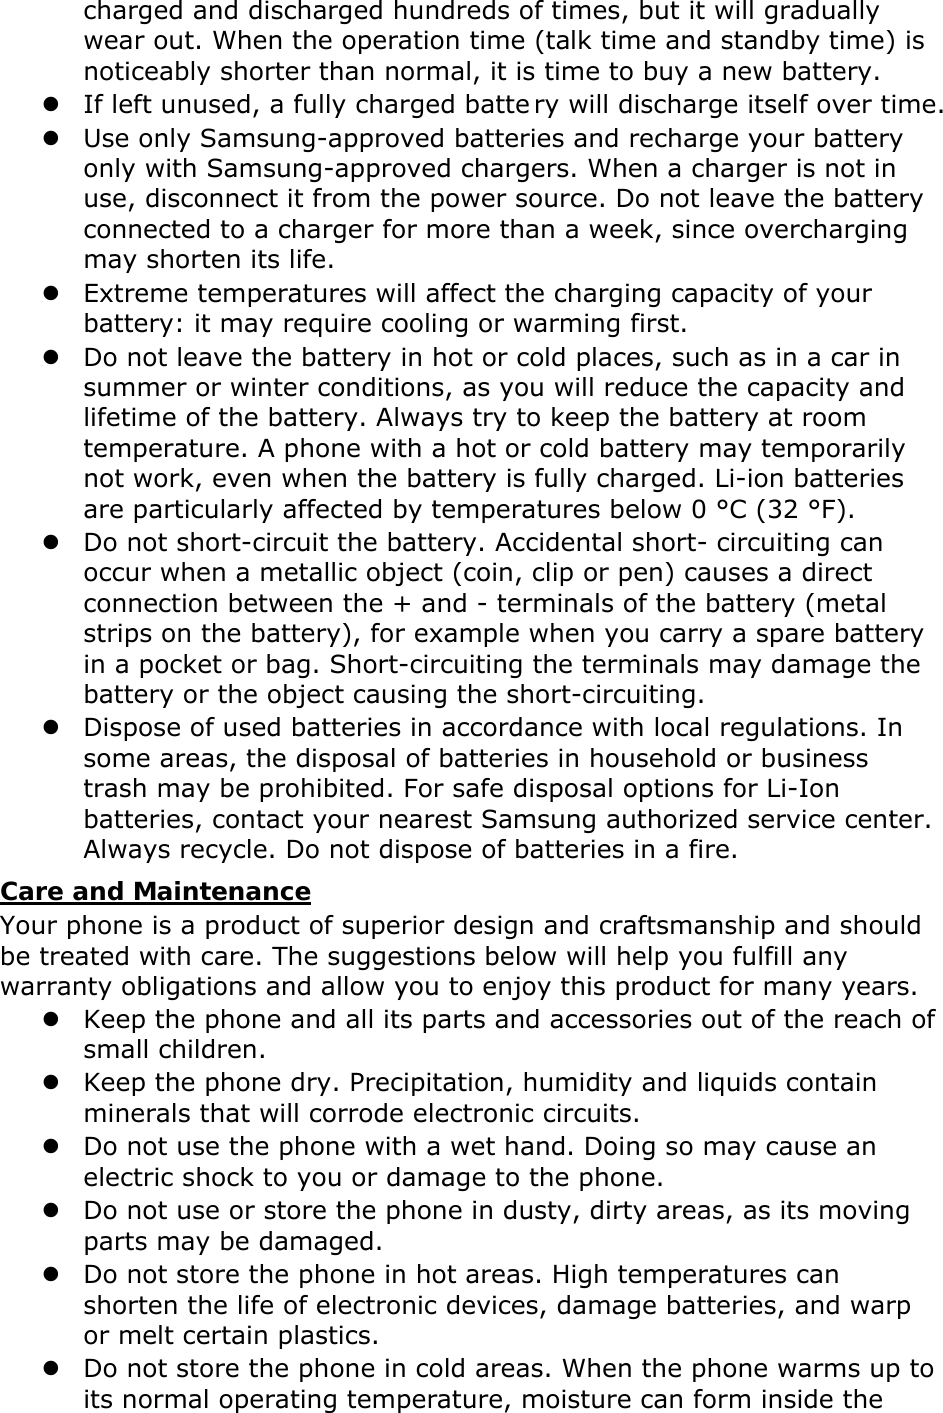 charged and discharged hundreds of times, but it will gradually wear out. When the operation time (talk time and standby time) is noticeably shorter than normal, it is time to buy a new battery.  If left unused, a fully charged batte ry will discharge itself over time.   Use only Samsung-approved batteries and recharge your battery only with Samsung-approved chargers. When a charger is not in use, disconnect it from the power source. Do not leave the battery connected to a charger for more than a week, since overcharging may shorten its life.  Extreme temperatures will affect the charging capacity of your battery: it may require cooling or warming first.  Do not leave the battery in hot or cold places, such as in a car in summer or winter conditions, as you will reduce the capacity and lifetime of the battery. Always try to keep the battery at room temperature. A phone with a hot or cold battery may temporarily not work, even when the battery is fully charged. Li-ion batteries are particularly affected by temperatures below 0 °C (32 °F).  Do not short-circuit the battery. Accidental short- circuiting can occur when a metallic object (coin, clip or pen) causes a direct connection between the + and - terminals of the battery (metal strips on the battery), for example when you carry a spare battery in a pocket or bag. Short-circuiting the terminals may damage the battery or the object causing the short-circuiting.  Dispose of used batteries in accordance with local regulations. In some areas, the disposal of batteries in household or business trash may be prohibited. For safe disposal options for Li-Ion batteries, contact your nearest Samsung authorized service center. Always recycle. Do not dispose of batteries in a fire. Care and Maintenance Your phone is a product of superior design and craftsmanship and should be treated with care. The suggestions below will help you fulfill any warranty obligations and allow you to enjoy this product for many years.  Keep the phone and all its parts and accessories out of the reach of small children.  Keep the phone dry. Precipitation, humidity and liquids contain minerals that will corrode electronic circuits.  Do not use the phone with a wet hand. Doing so may cause an electric shock to you or damage to the phone.  Do not use or store the phone in dusty, dirty areas, as its moving parts may be damaged.  Do not store the phone in hot areas. High temperatures can shorten the life of electronic devices, damage batteries, and warp or melt certain plastics.  Do not store the phone in cold areas. When the phone warms up to its normal operating temperature, moisture can form inside the 